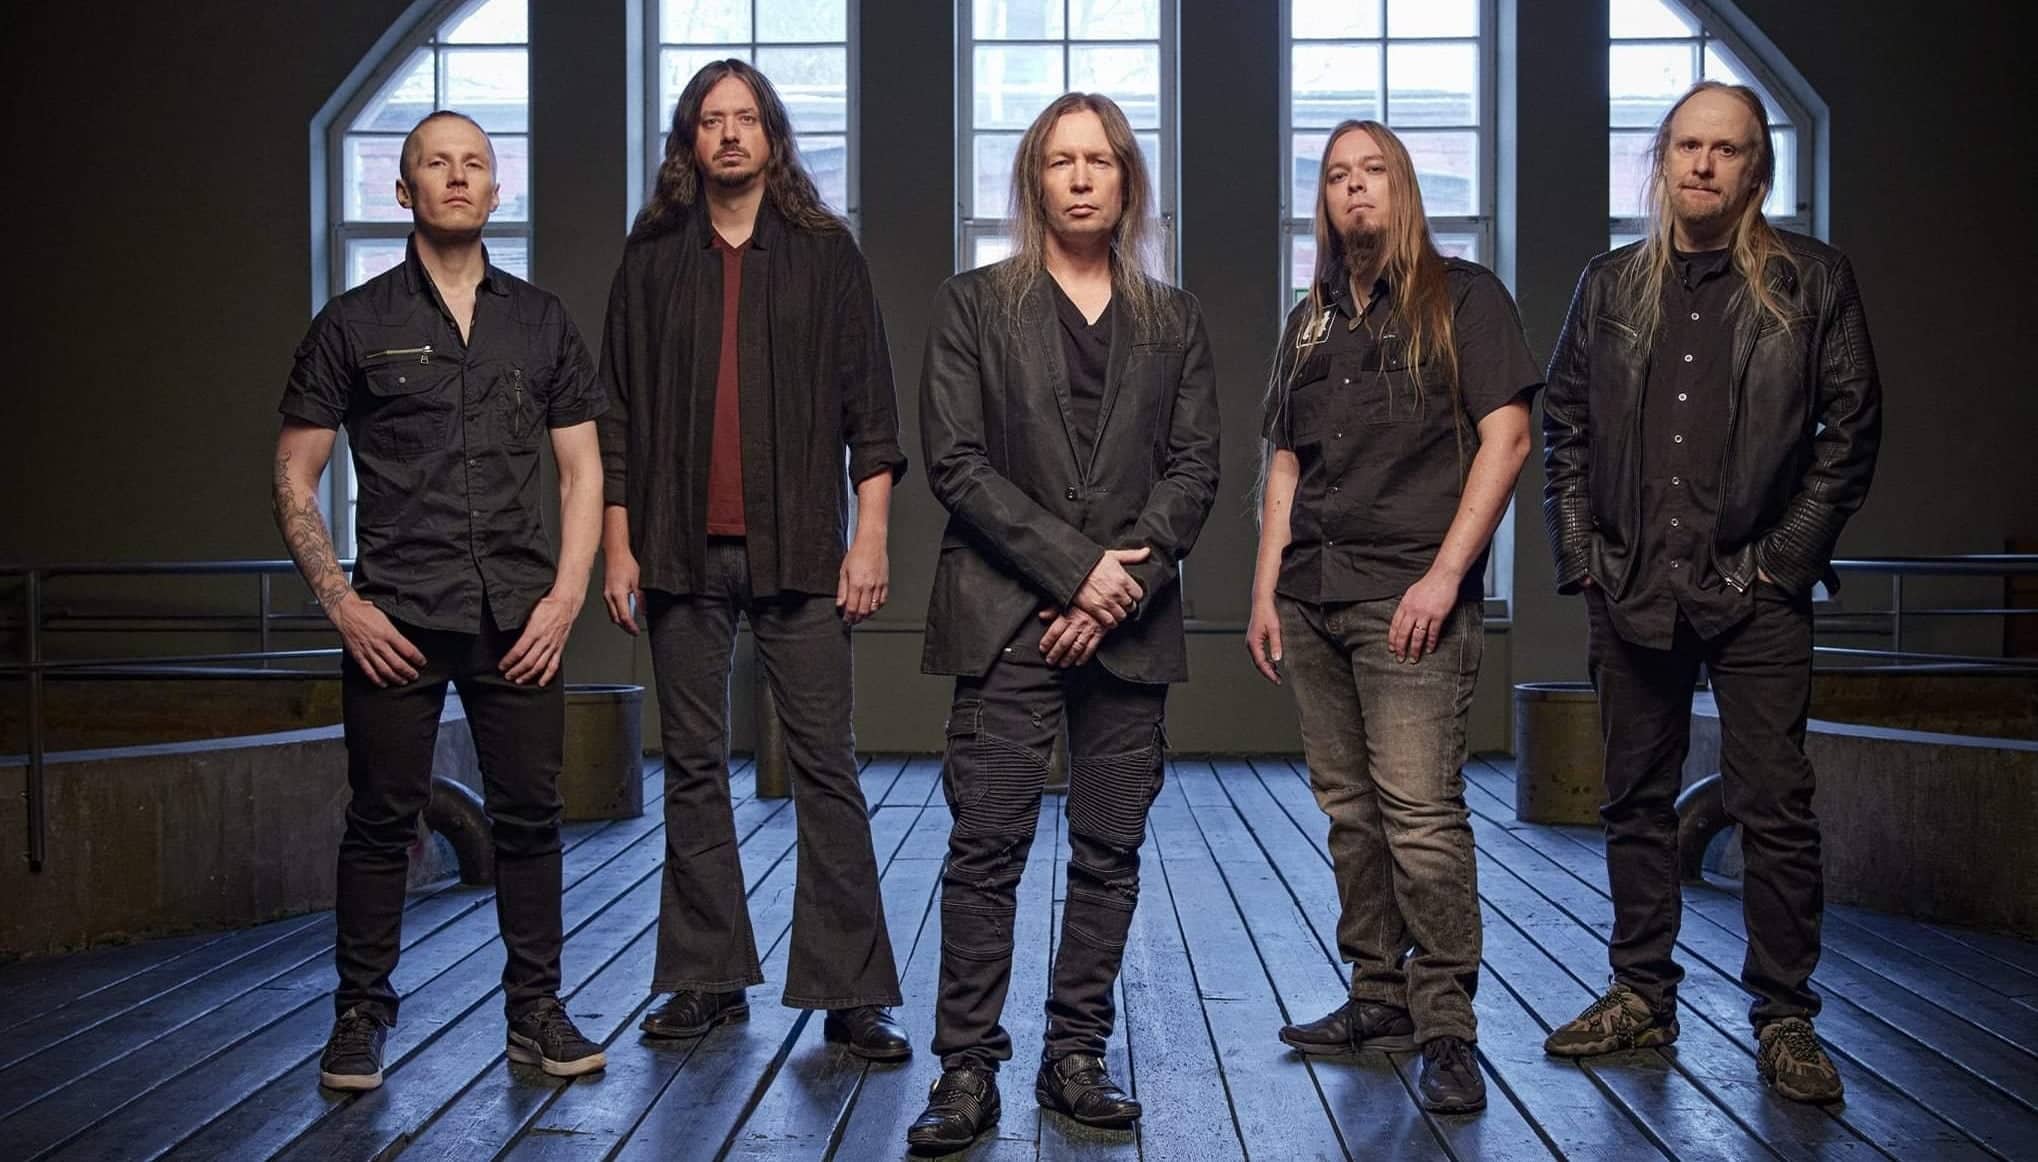 You are currently viewing STRATOVARIUS release music video for the title track of their new album “Survive”.